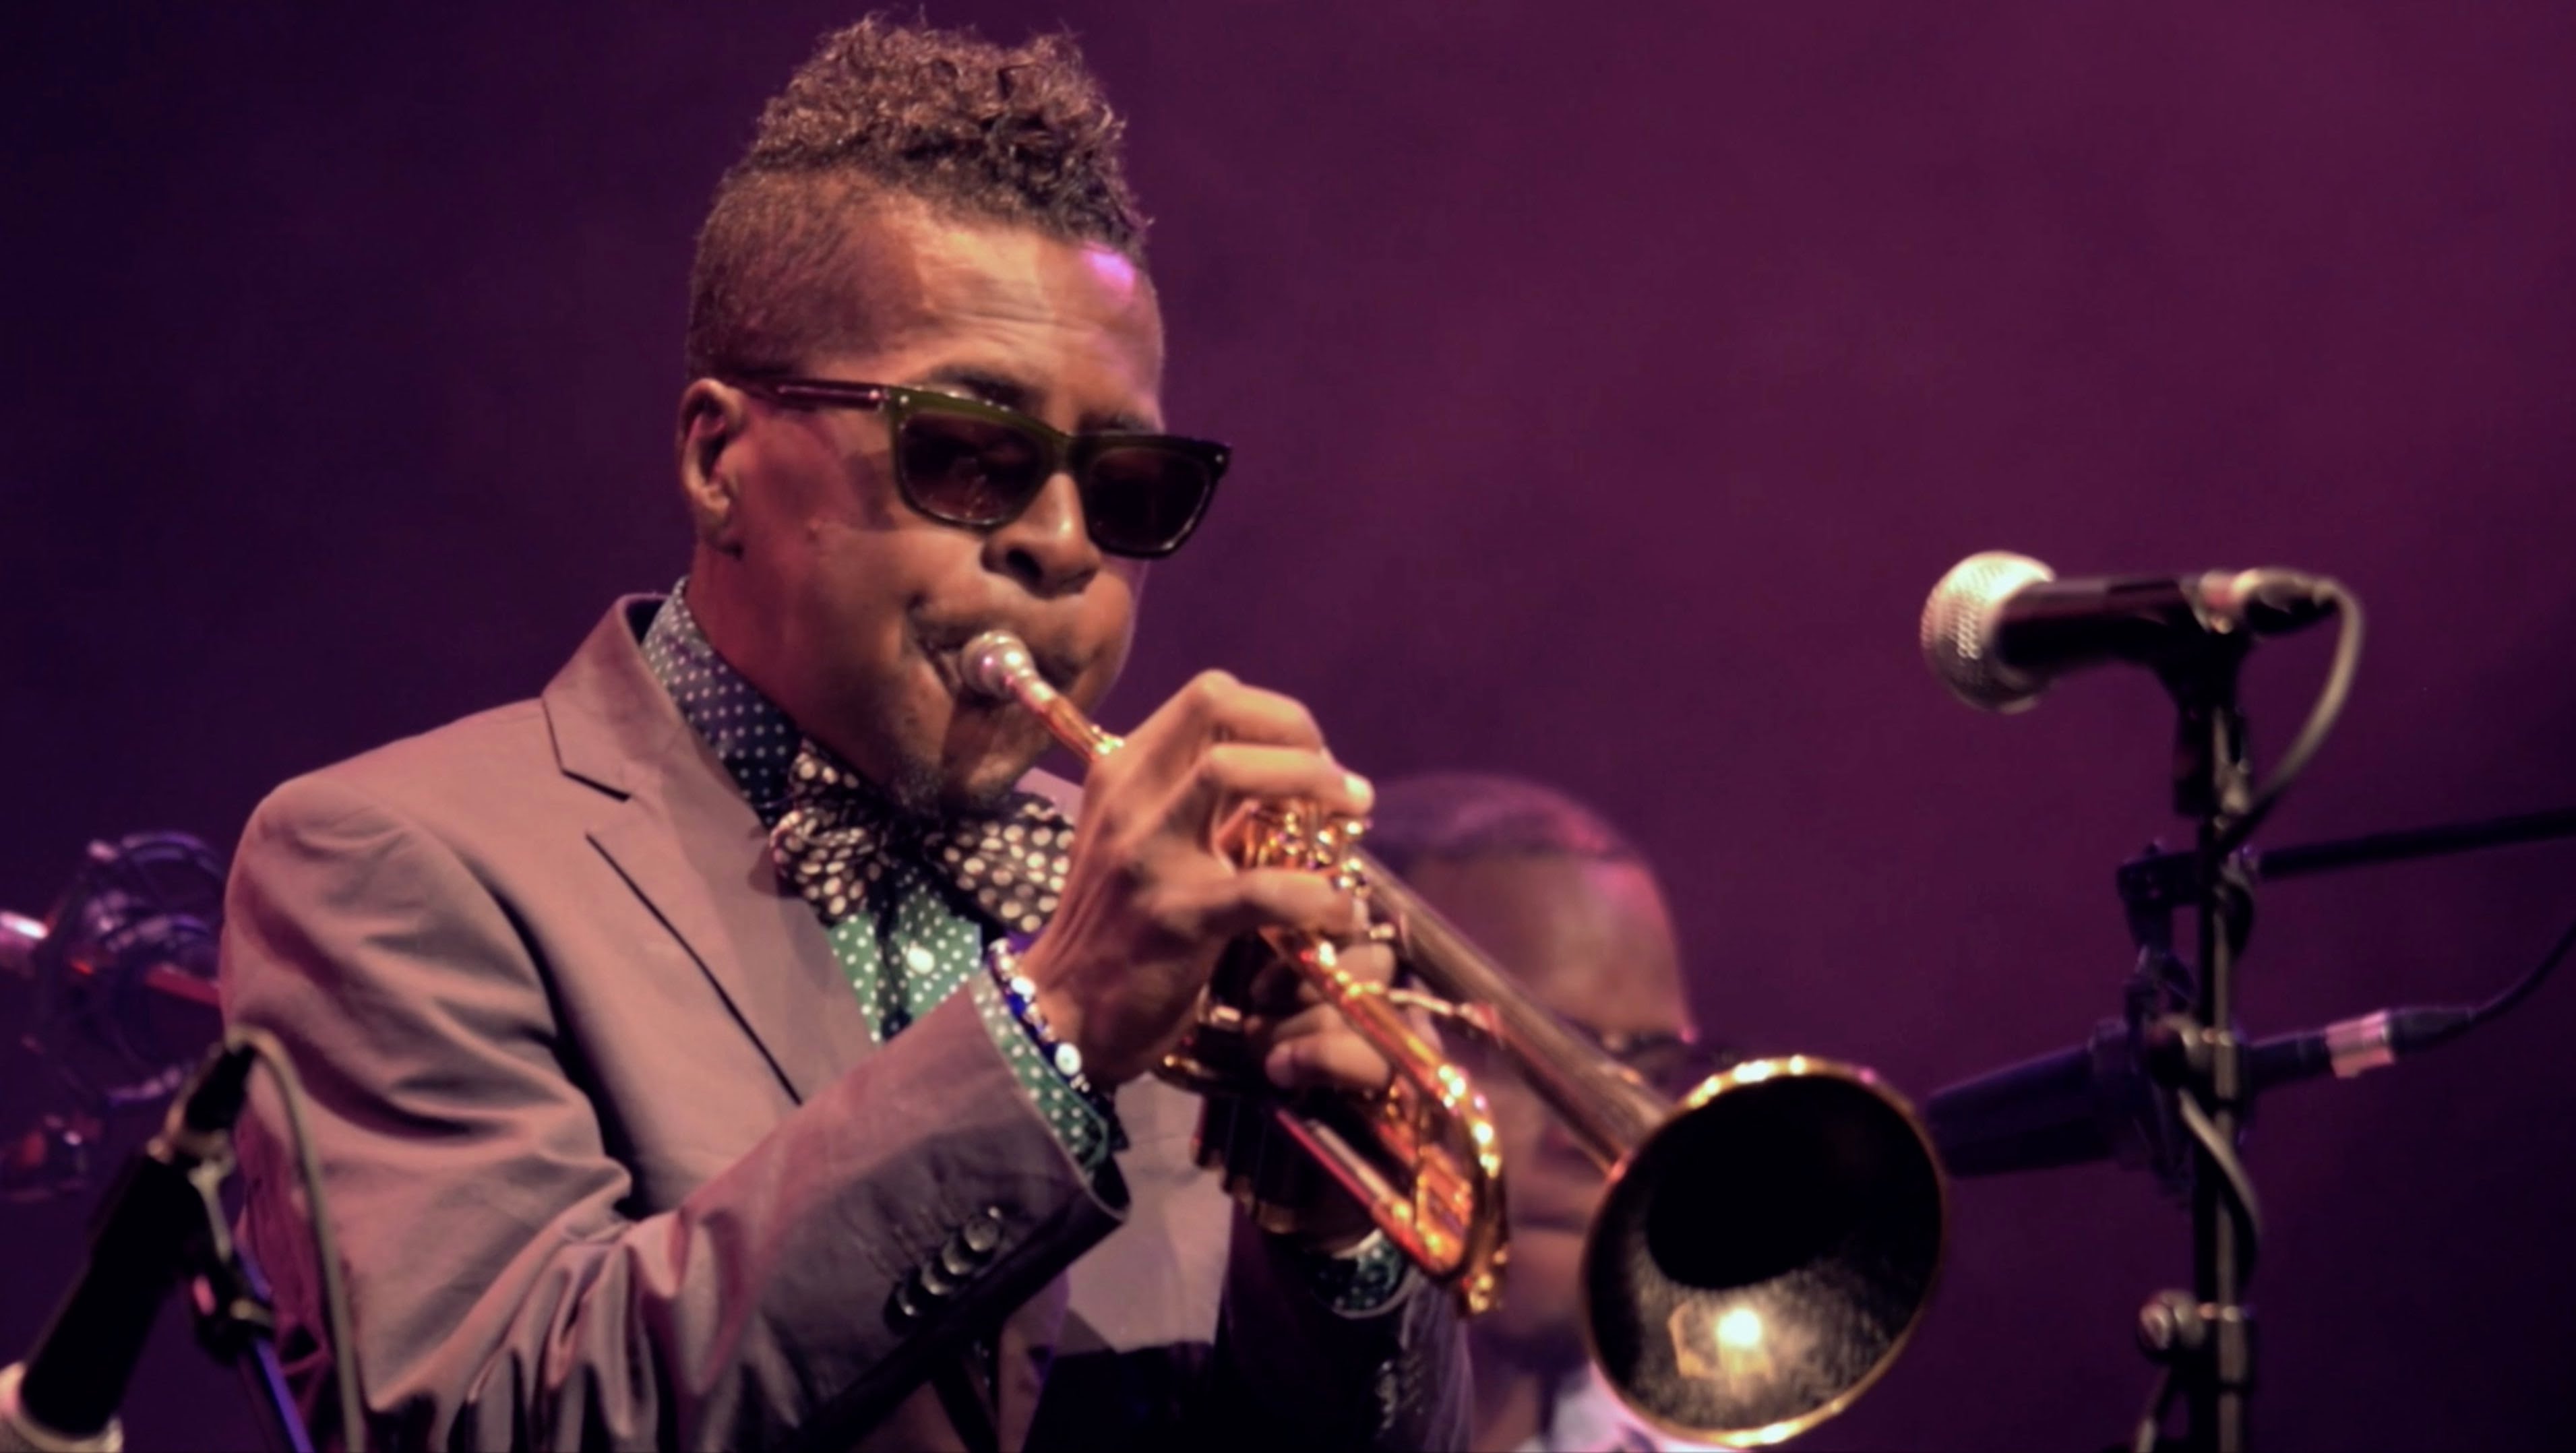 Acclaimed jazz musician Roy Hargrove has died, aged 49.